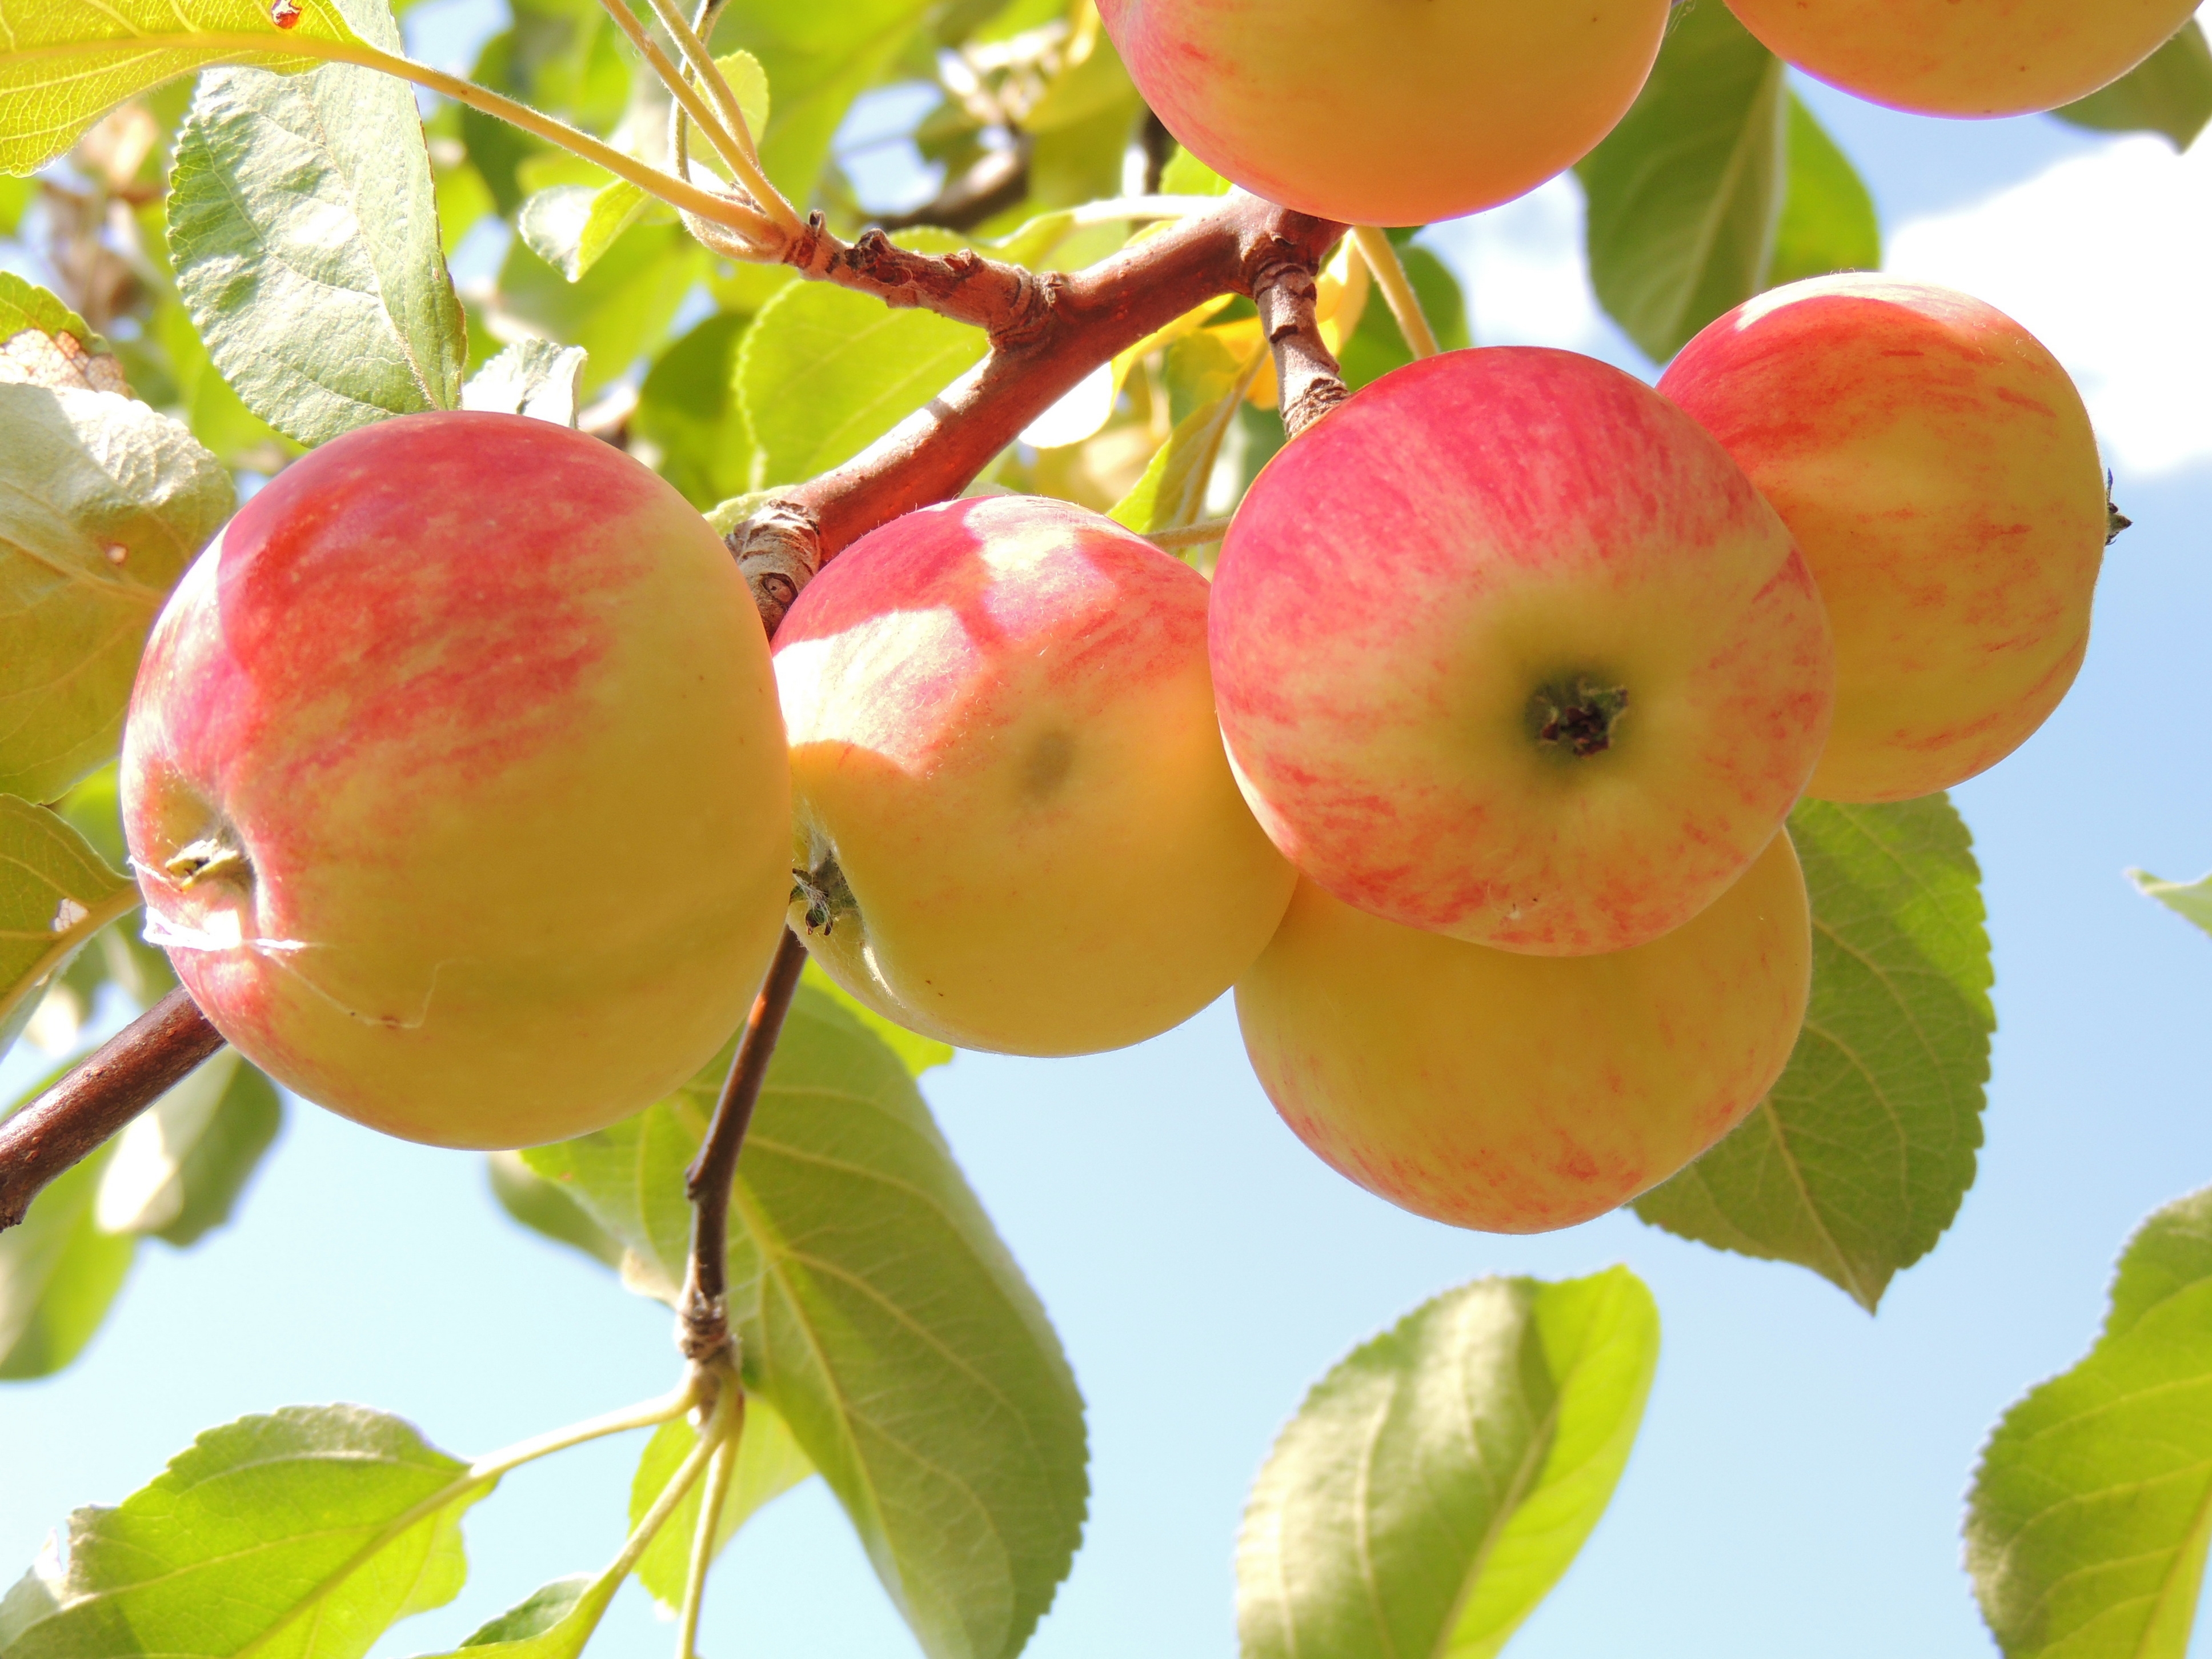 leaves, background, apples, food, branch 1080p